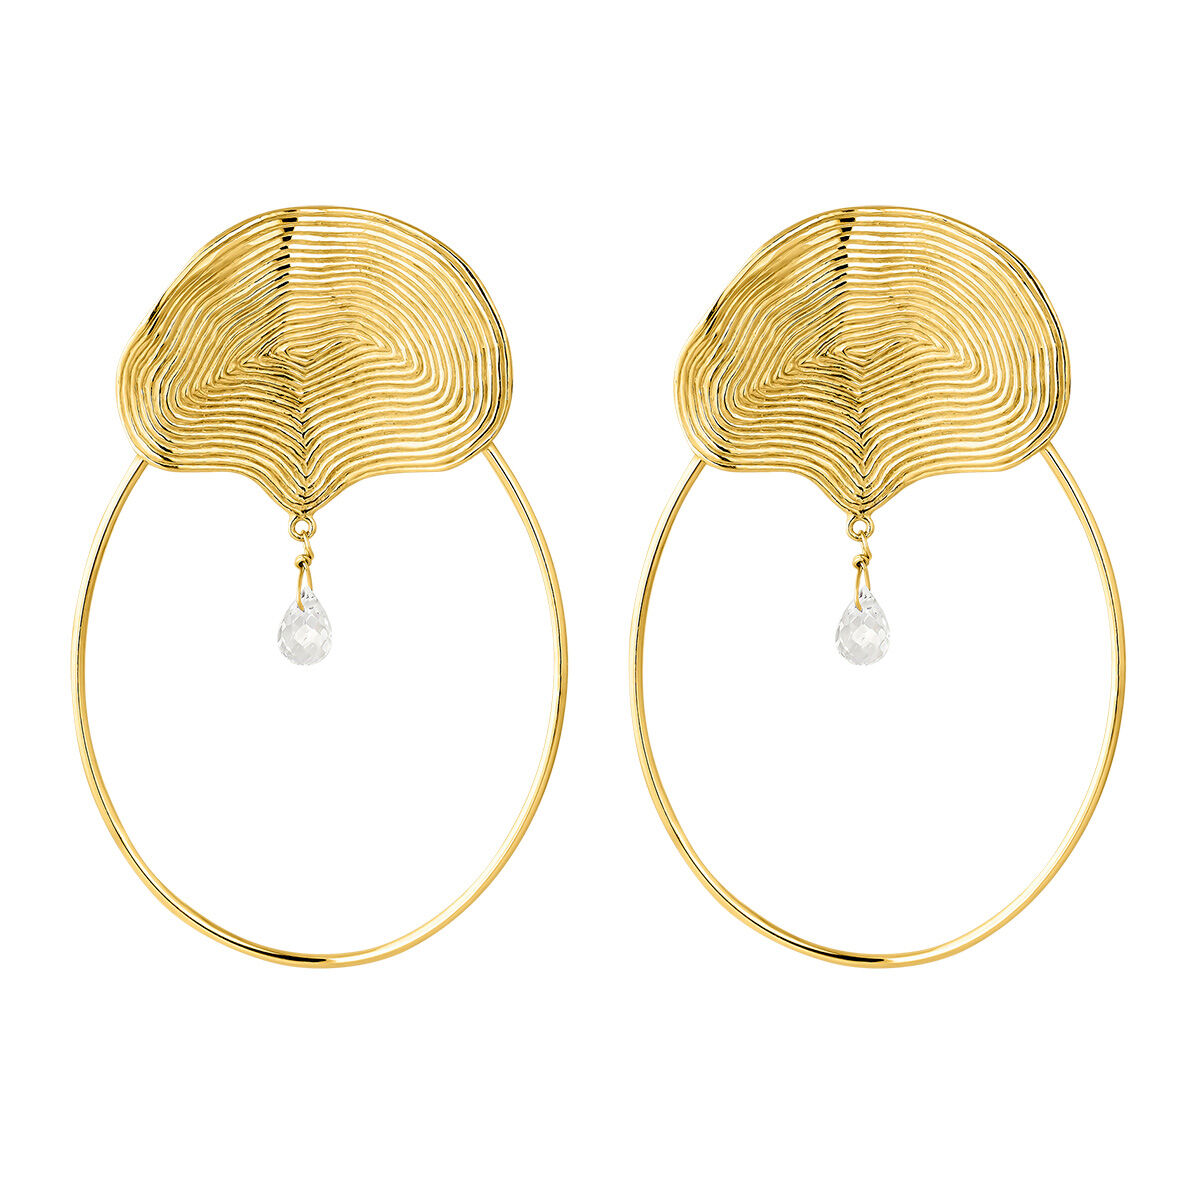 XL-size, embossed hoop earrings in 18kt yellow gold-plated silver with white topaz, J05218-02-WT, hi-res